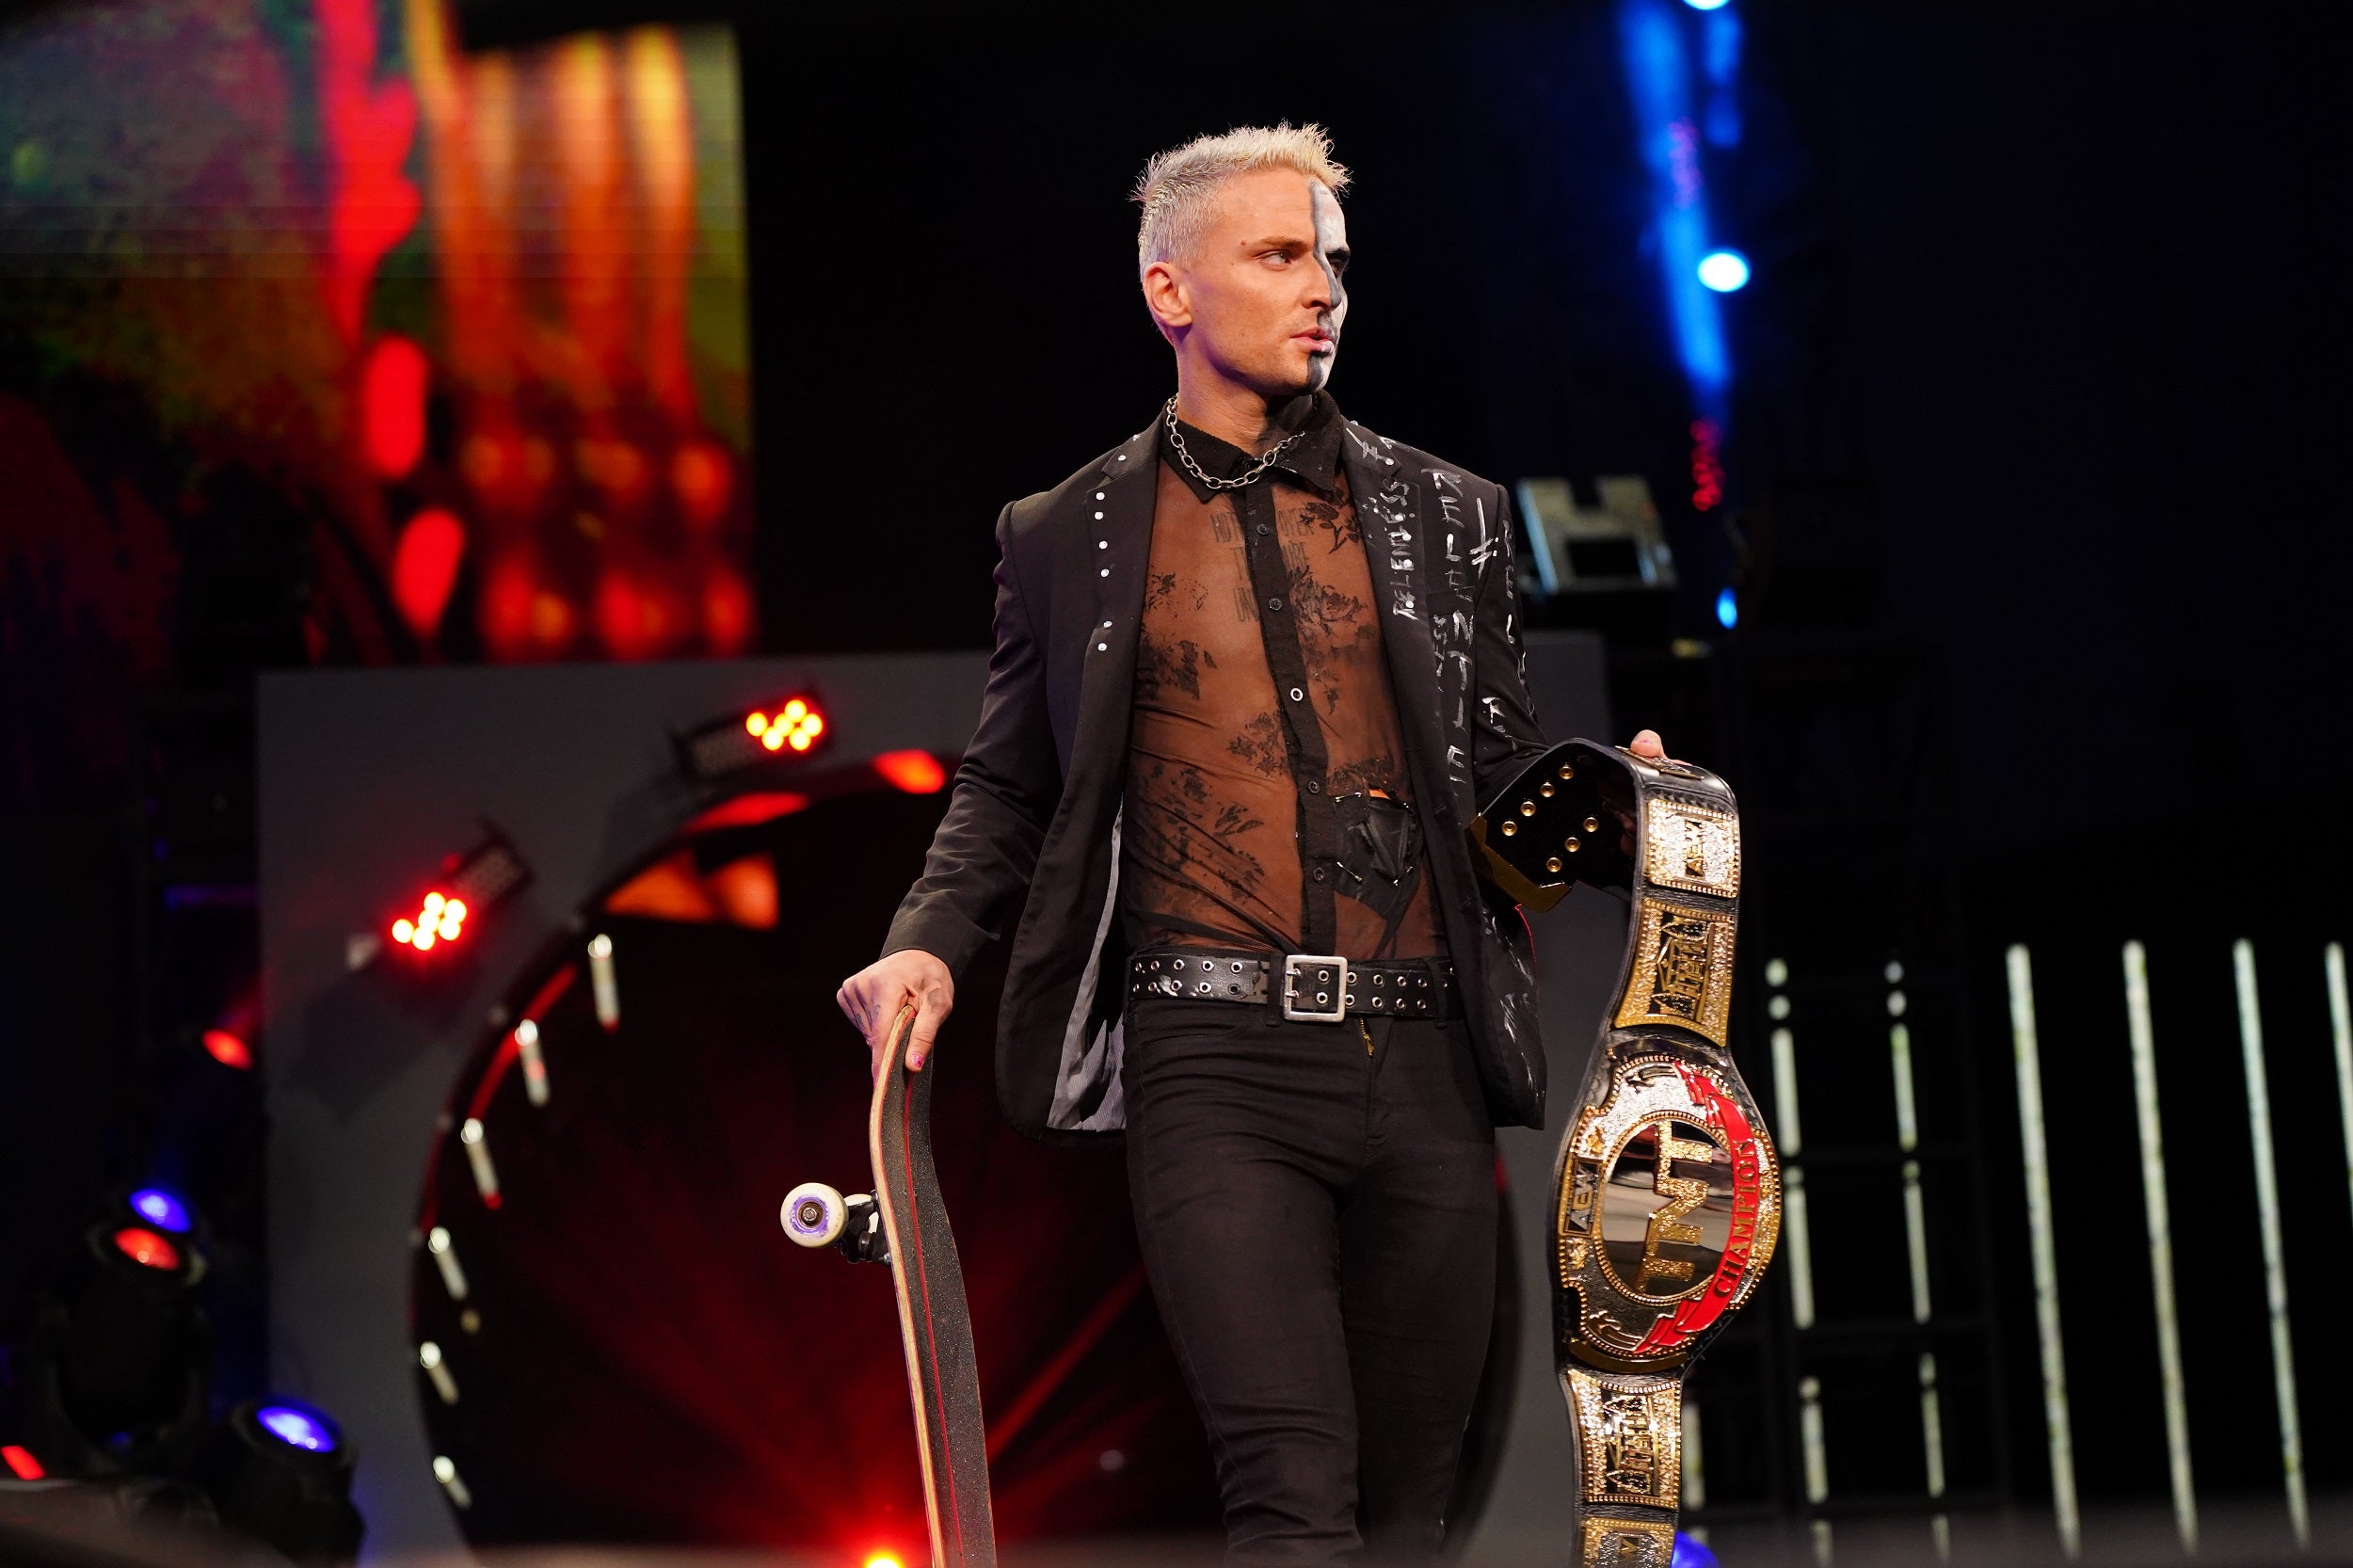 Darby Allin is AEW’s reigning TNT Champion